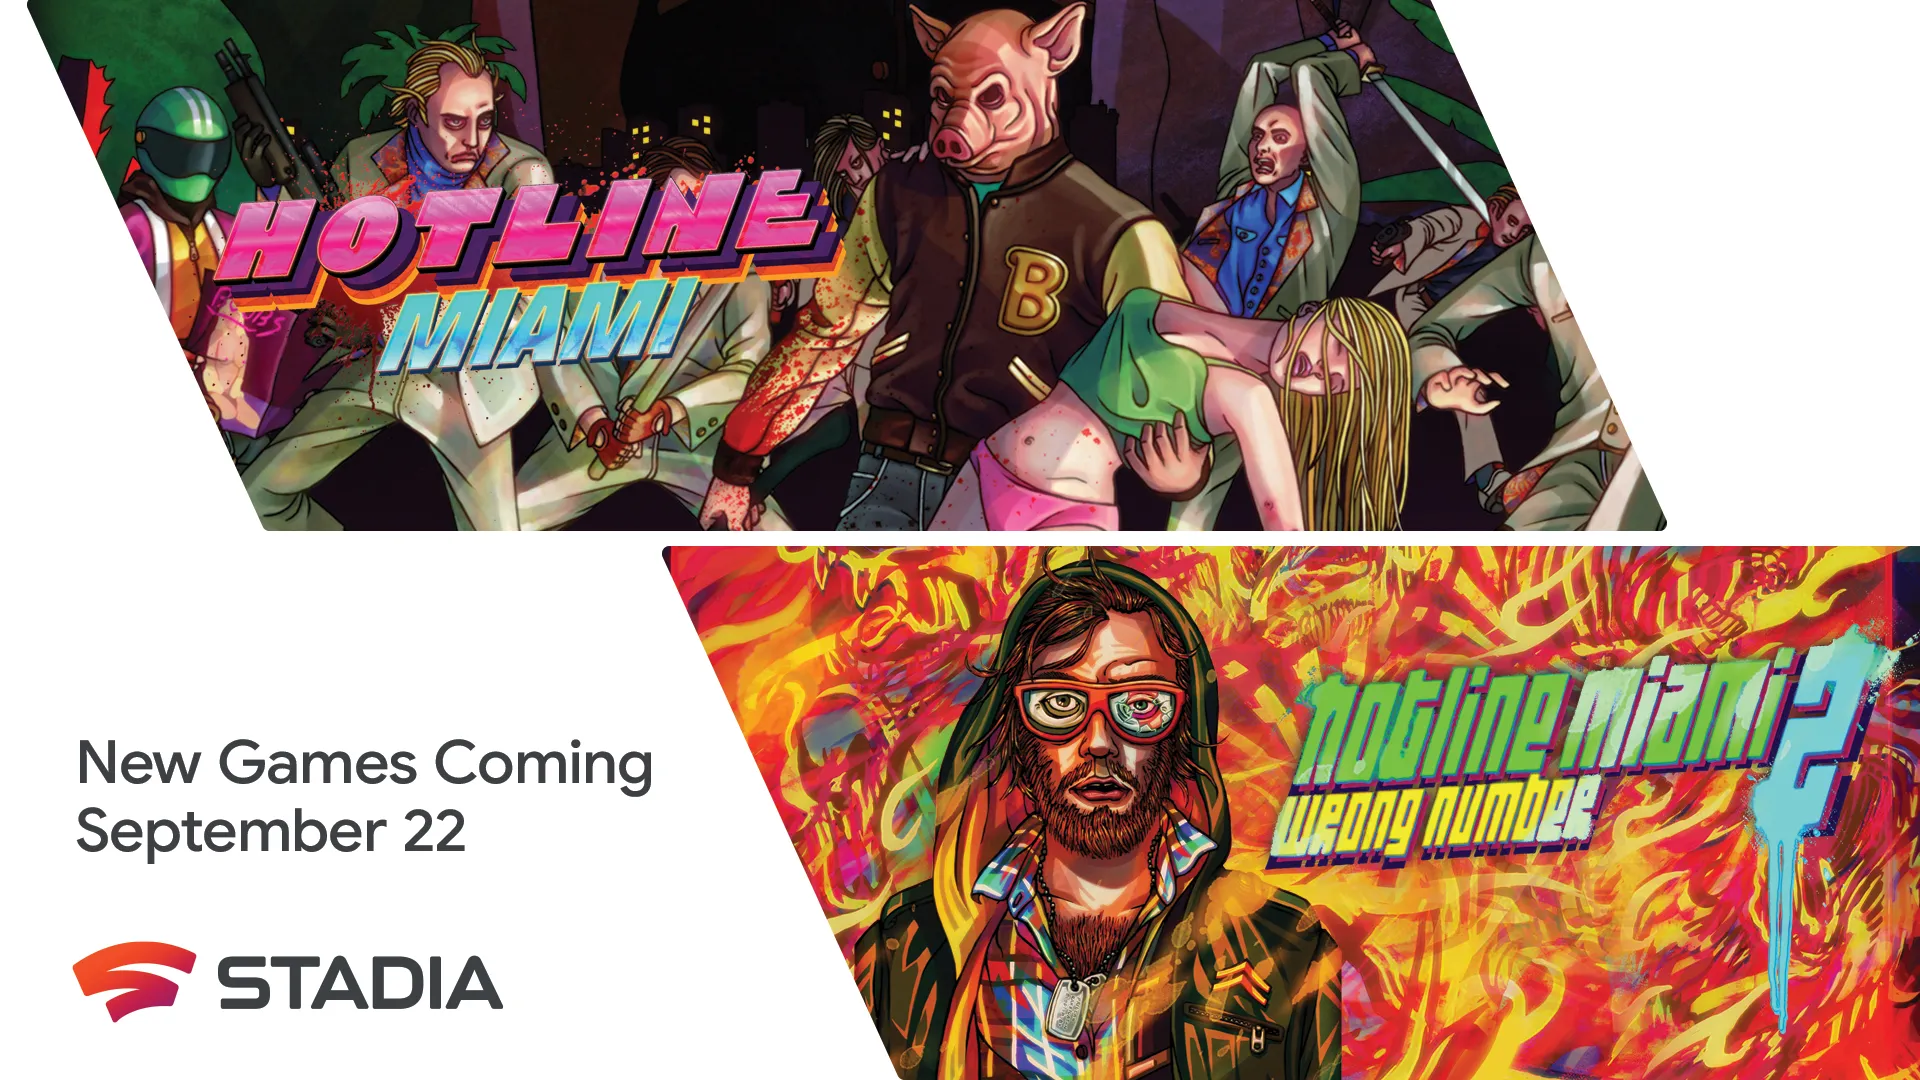 Stadia 2 Games HotlineMiami1and2 date 5f65e8a40e951